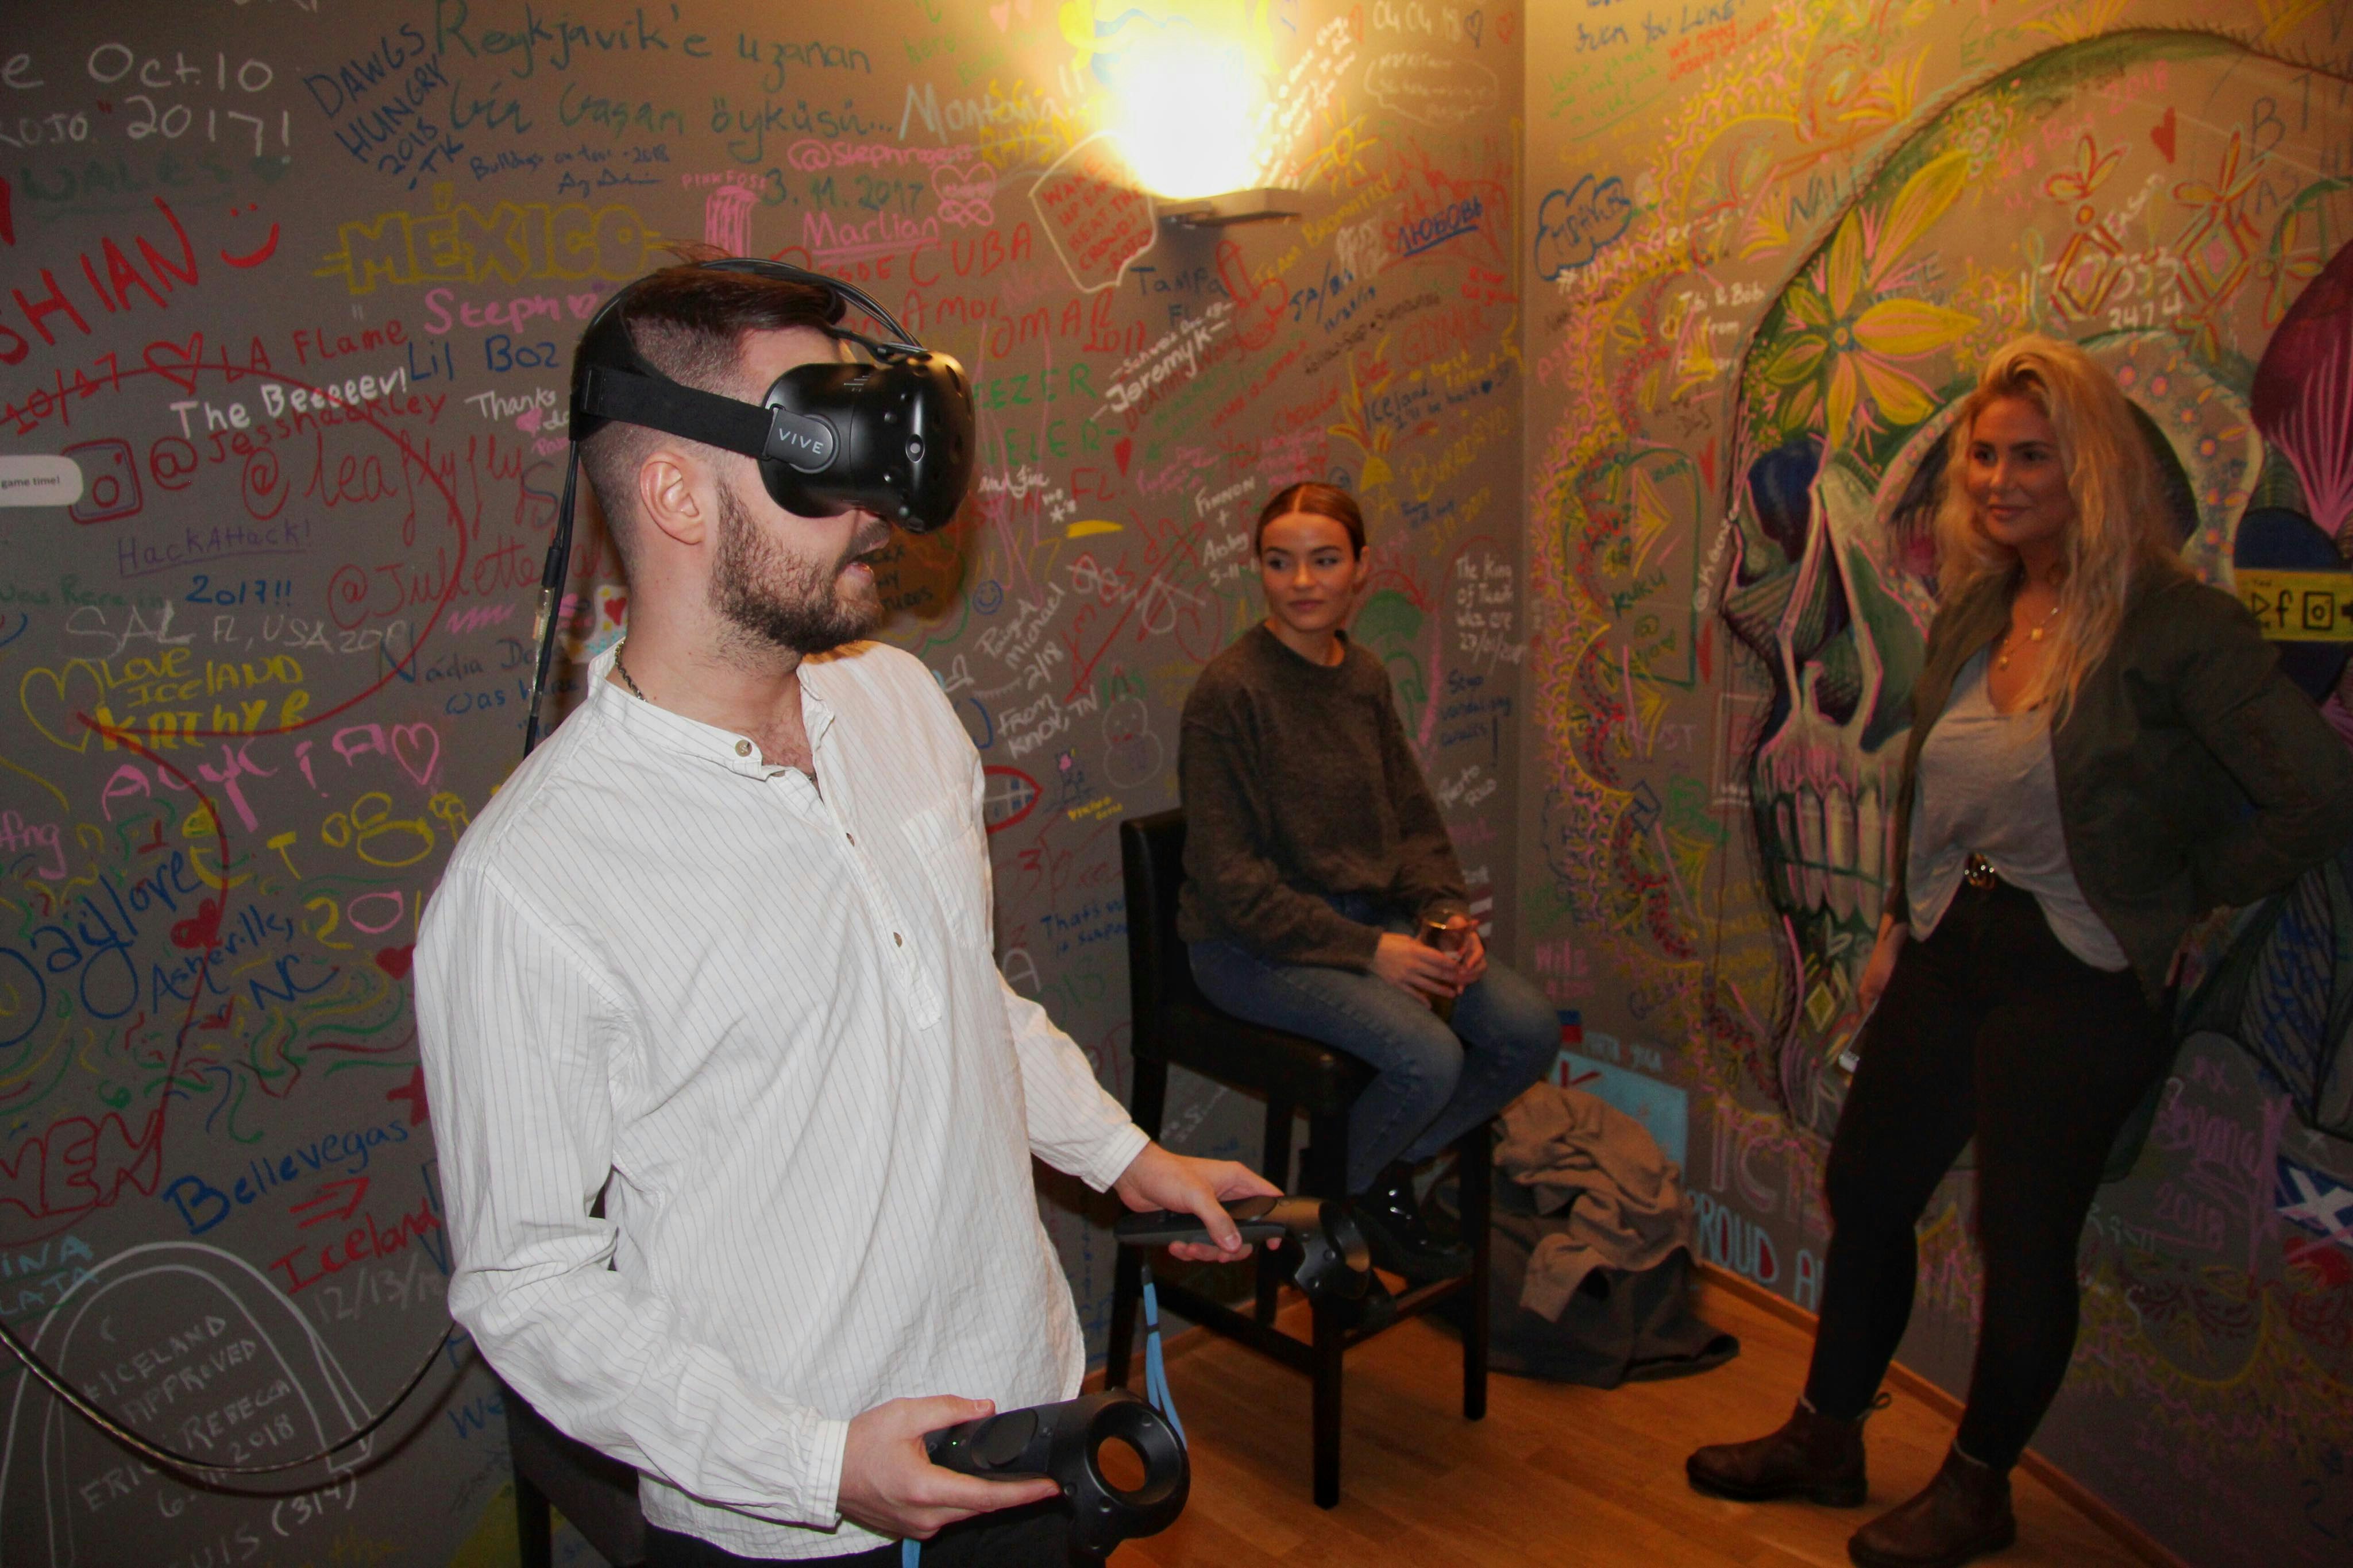 Guests at Galaxy Pod Hostel in Iceland play with a VR headset